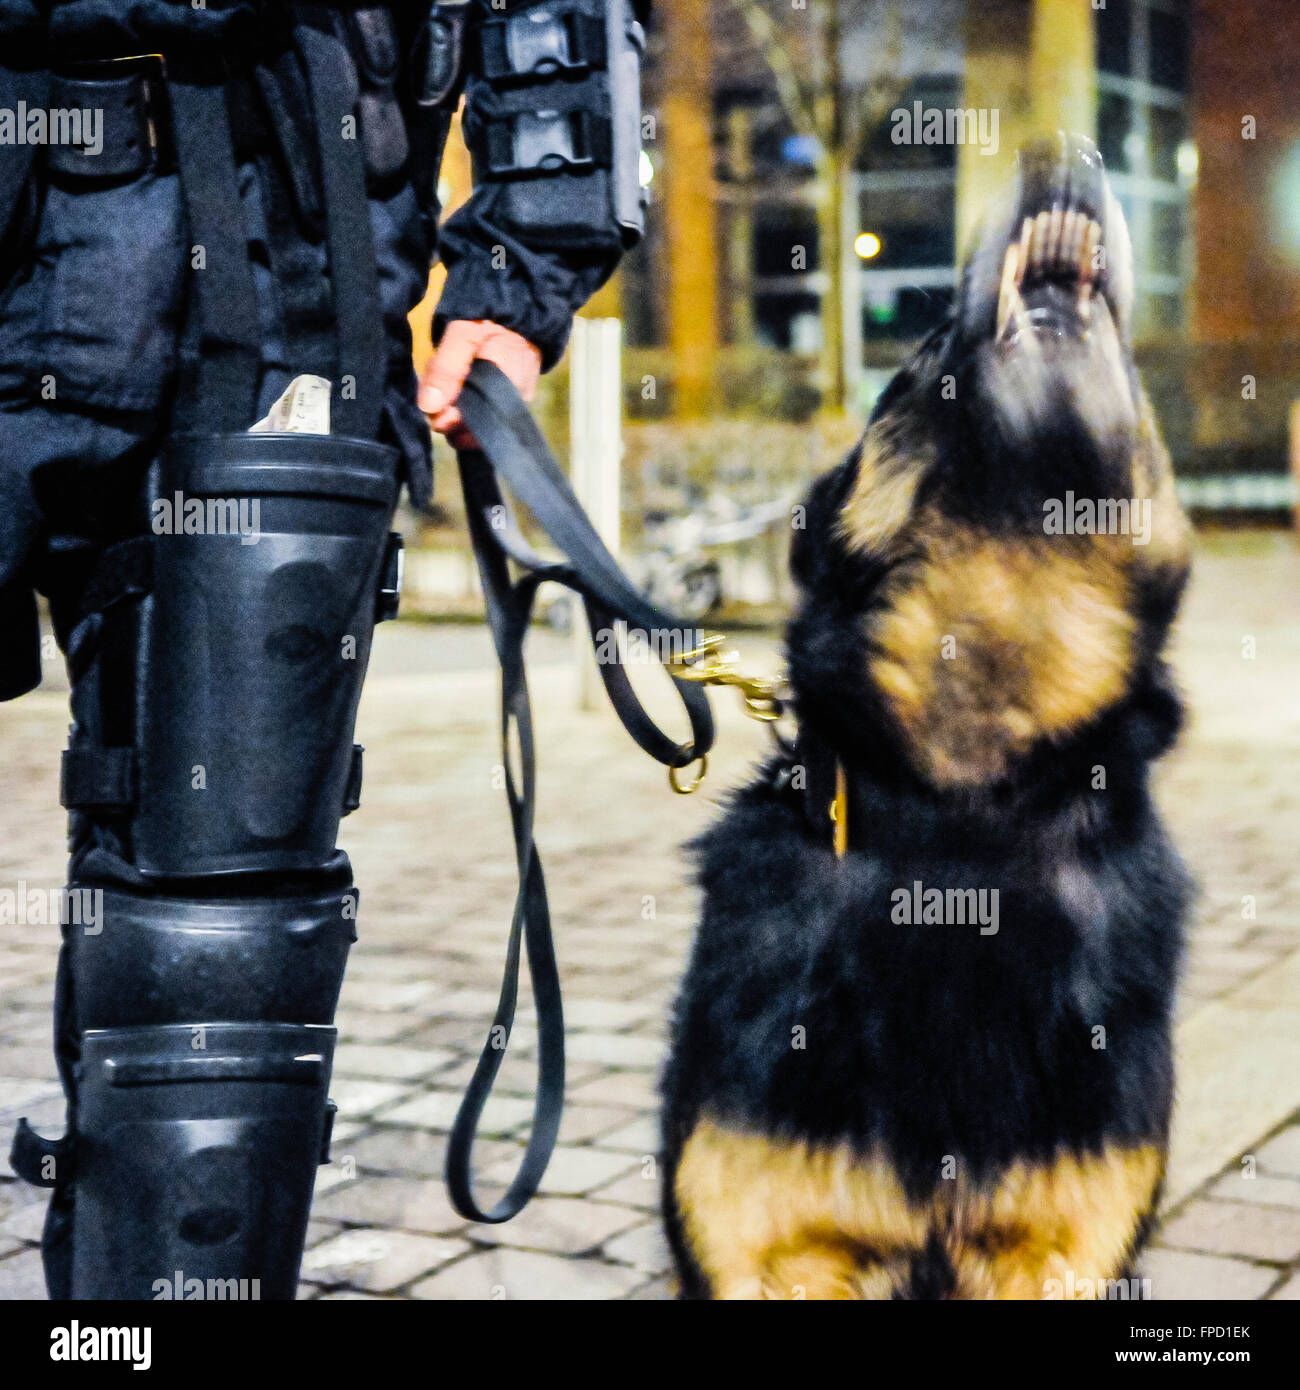 Belfast, Northern Ireland. 17 Mar 2016 - PSNI crowd control dog 'Scout' working with her handler at night. Stock Photo